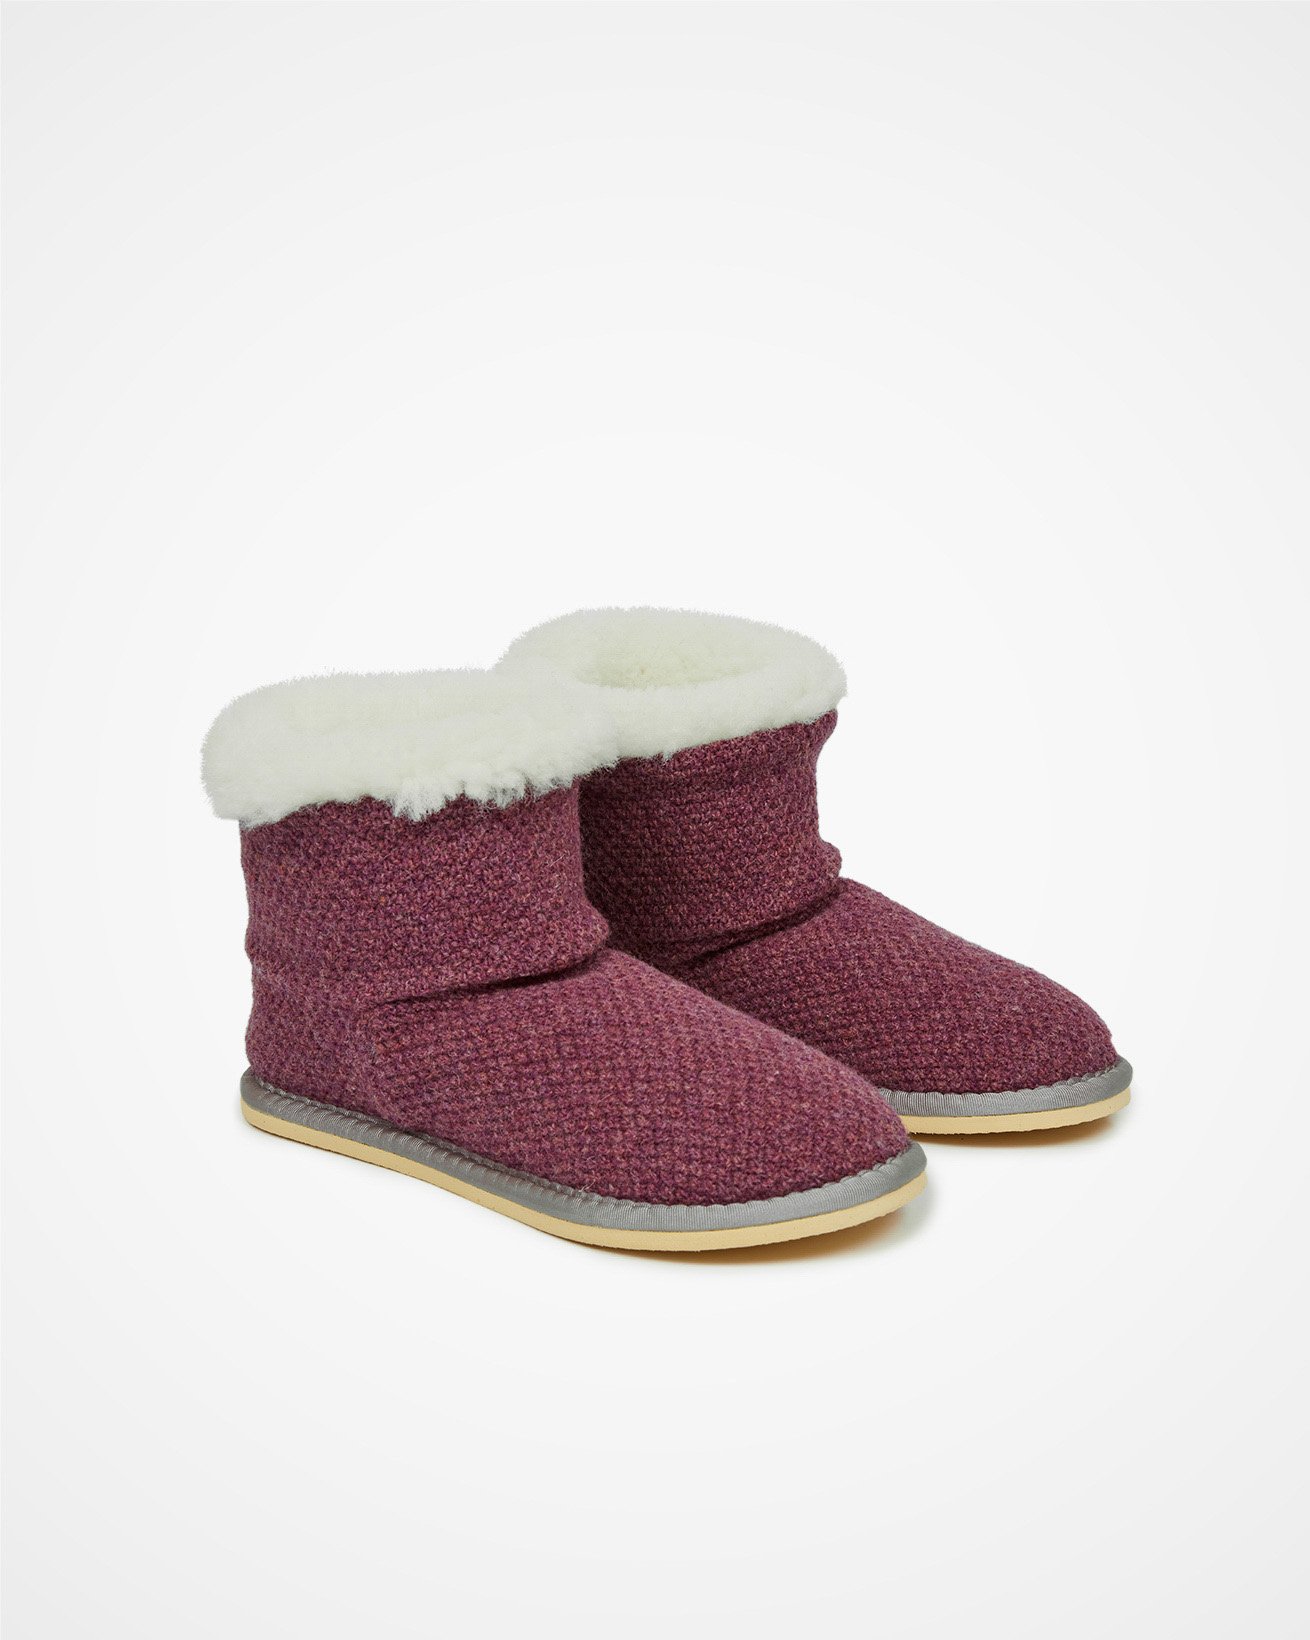 6610_knitted-shortie-slippers_sloeberry_pair_cutout_web.jpg